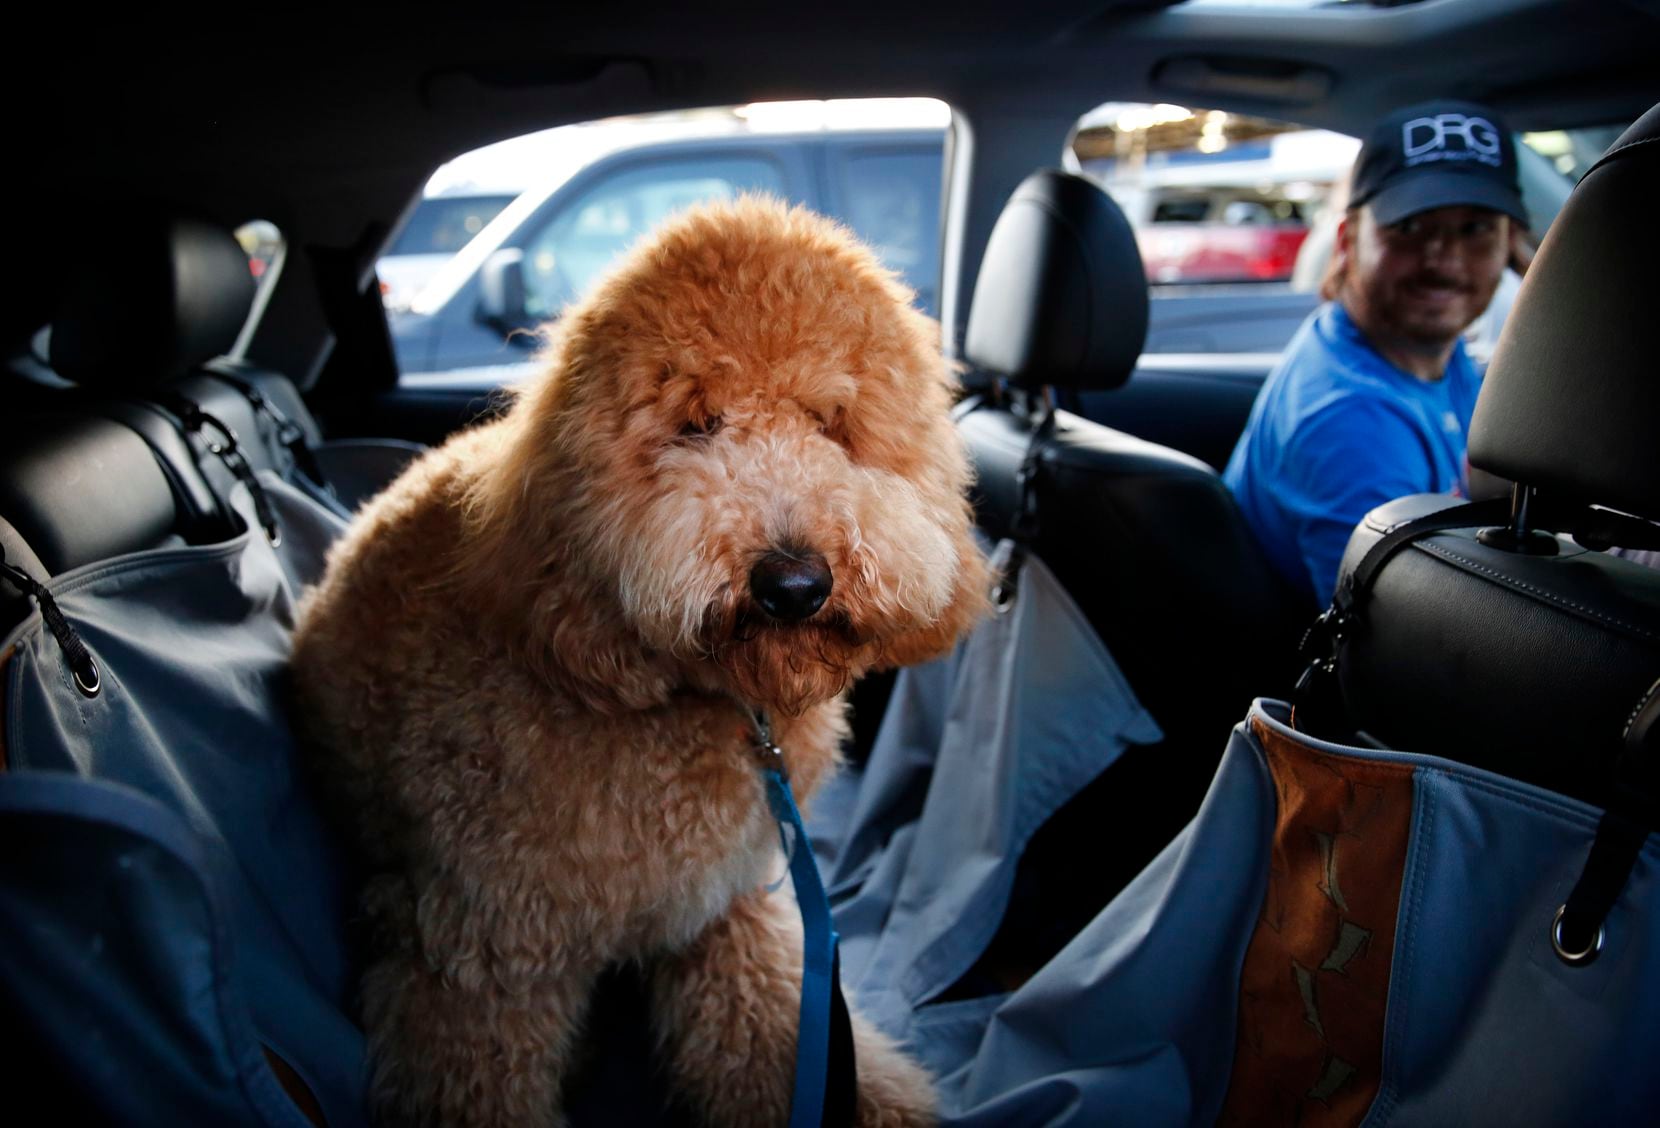 Justin Wallace brought his Labradoodle, Rowan, along to Keller's Drive-In for dinner.